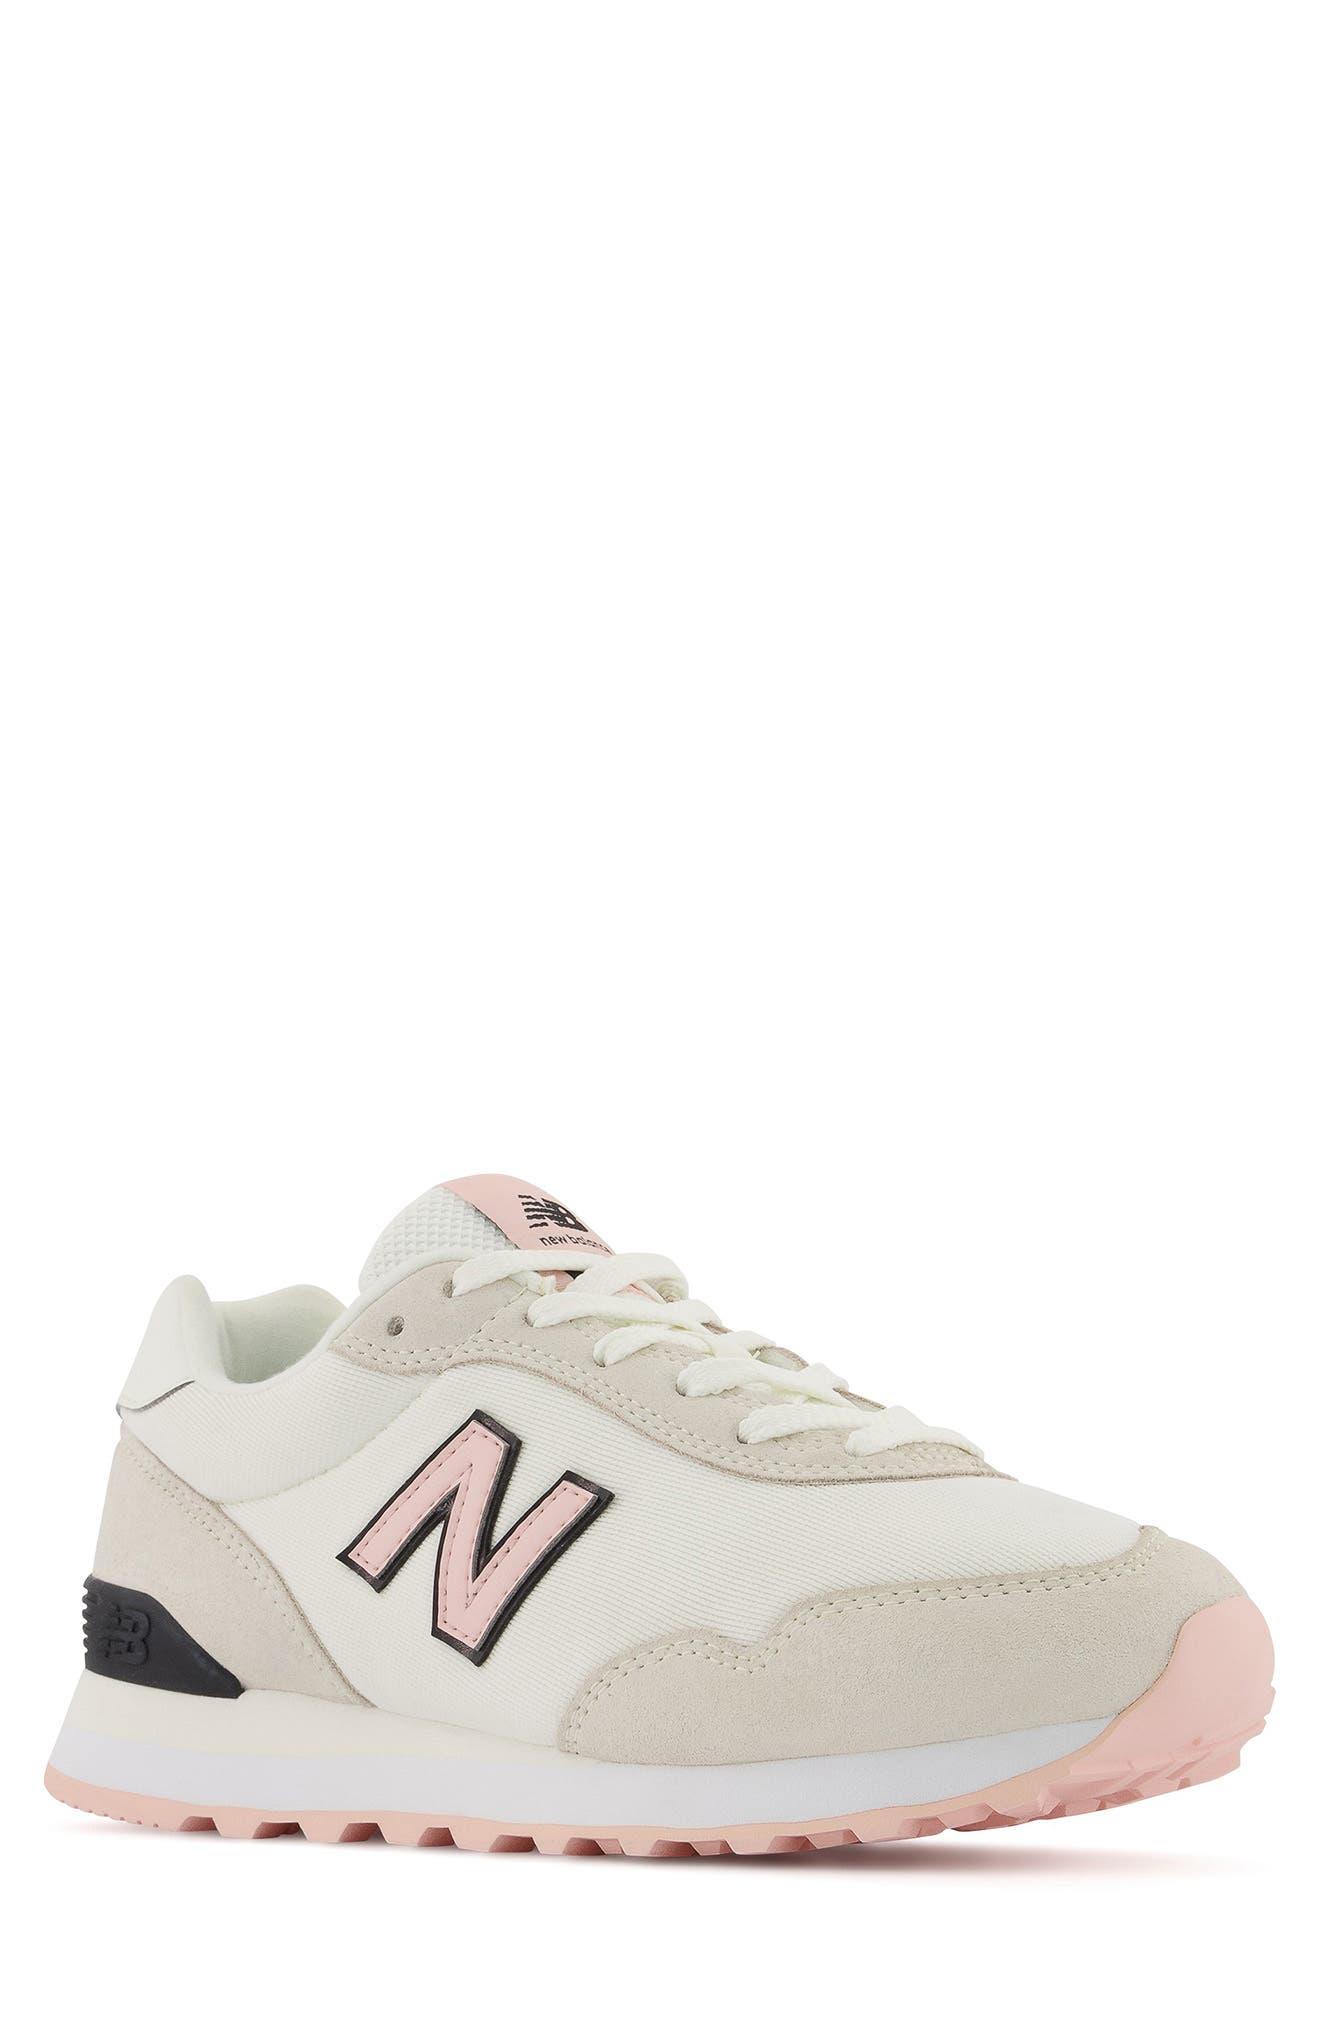 New Balance 515 Classic Suede Sneaker in Pink | Lyst